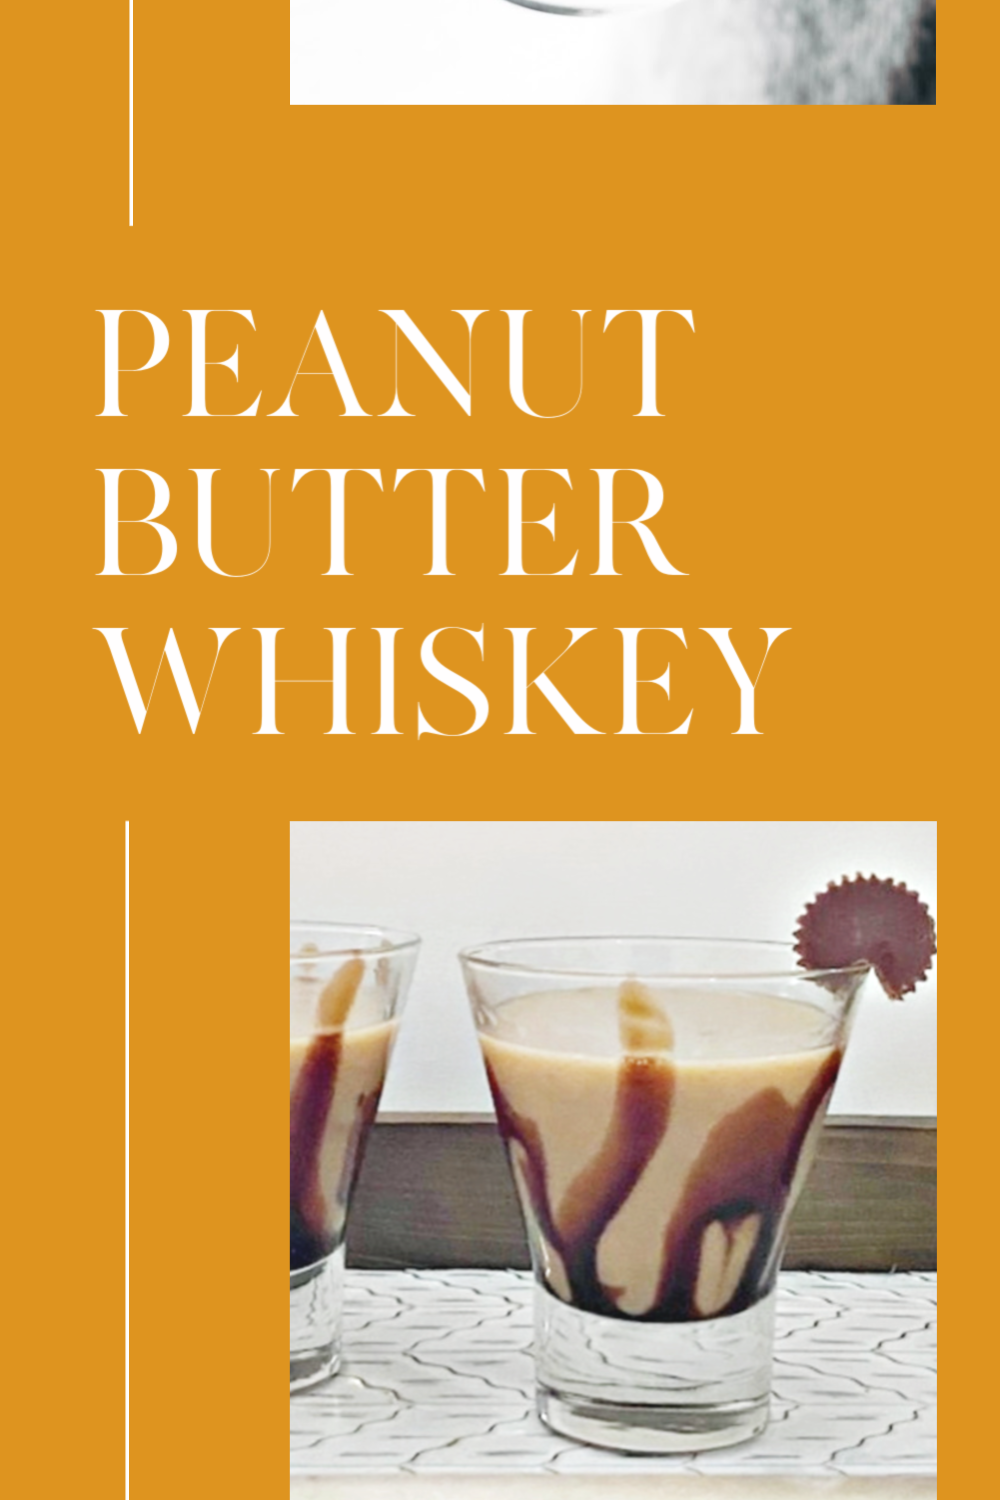 peanut butter whiskey pin image